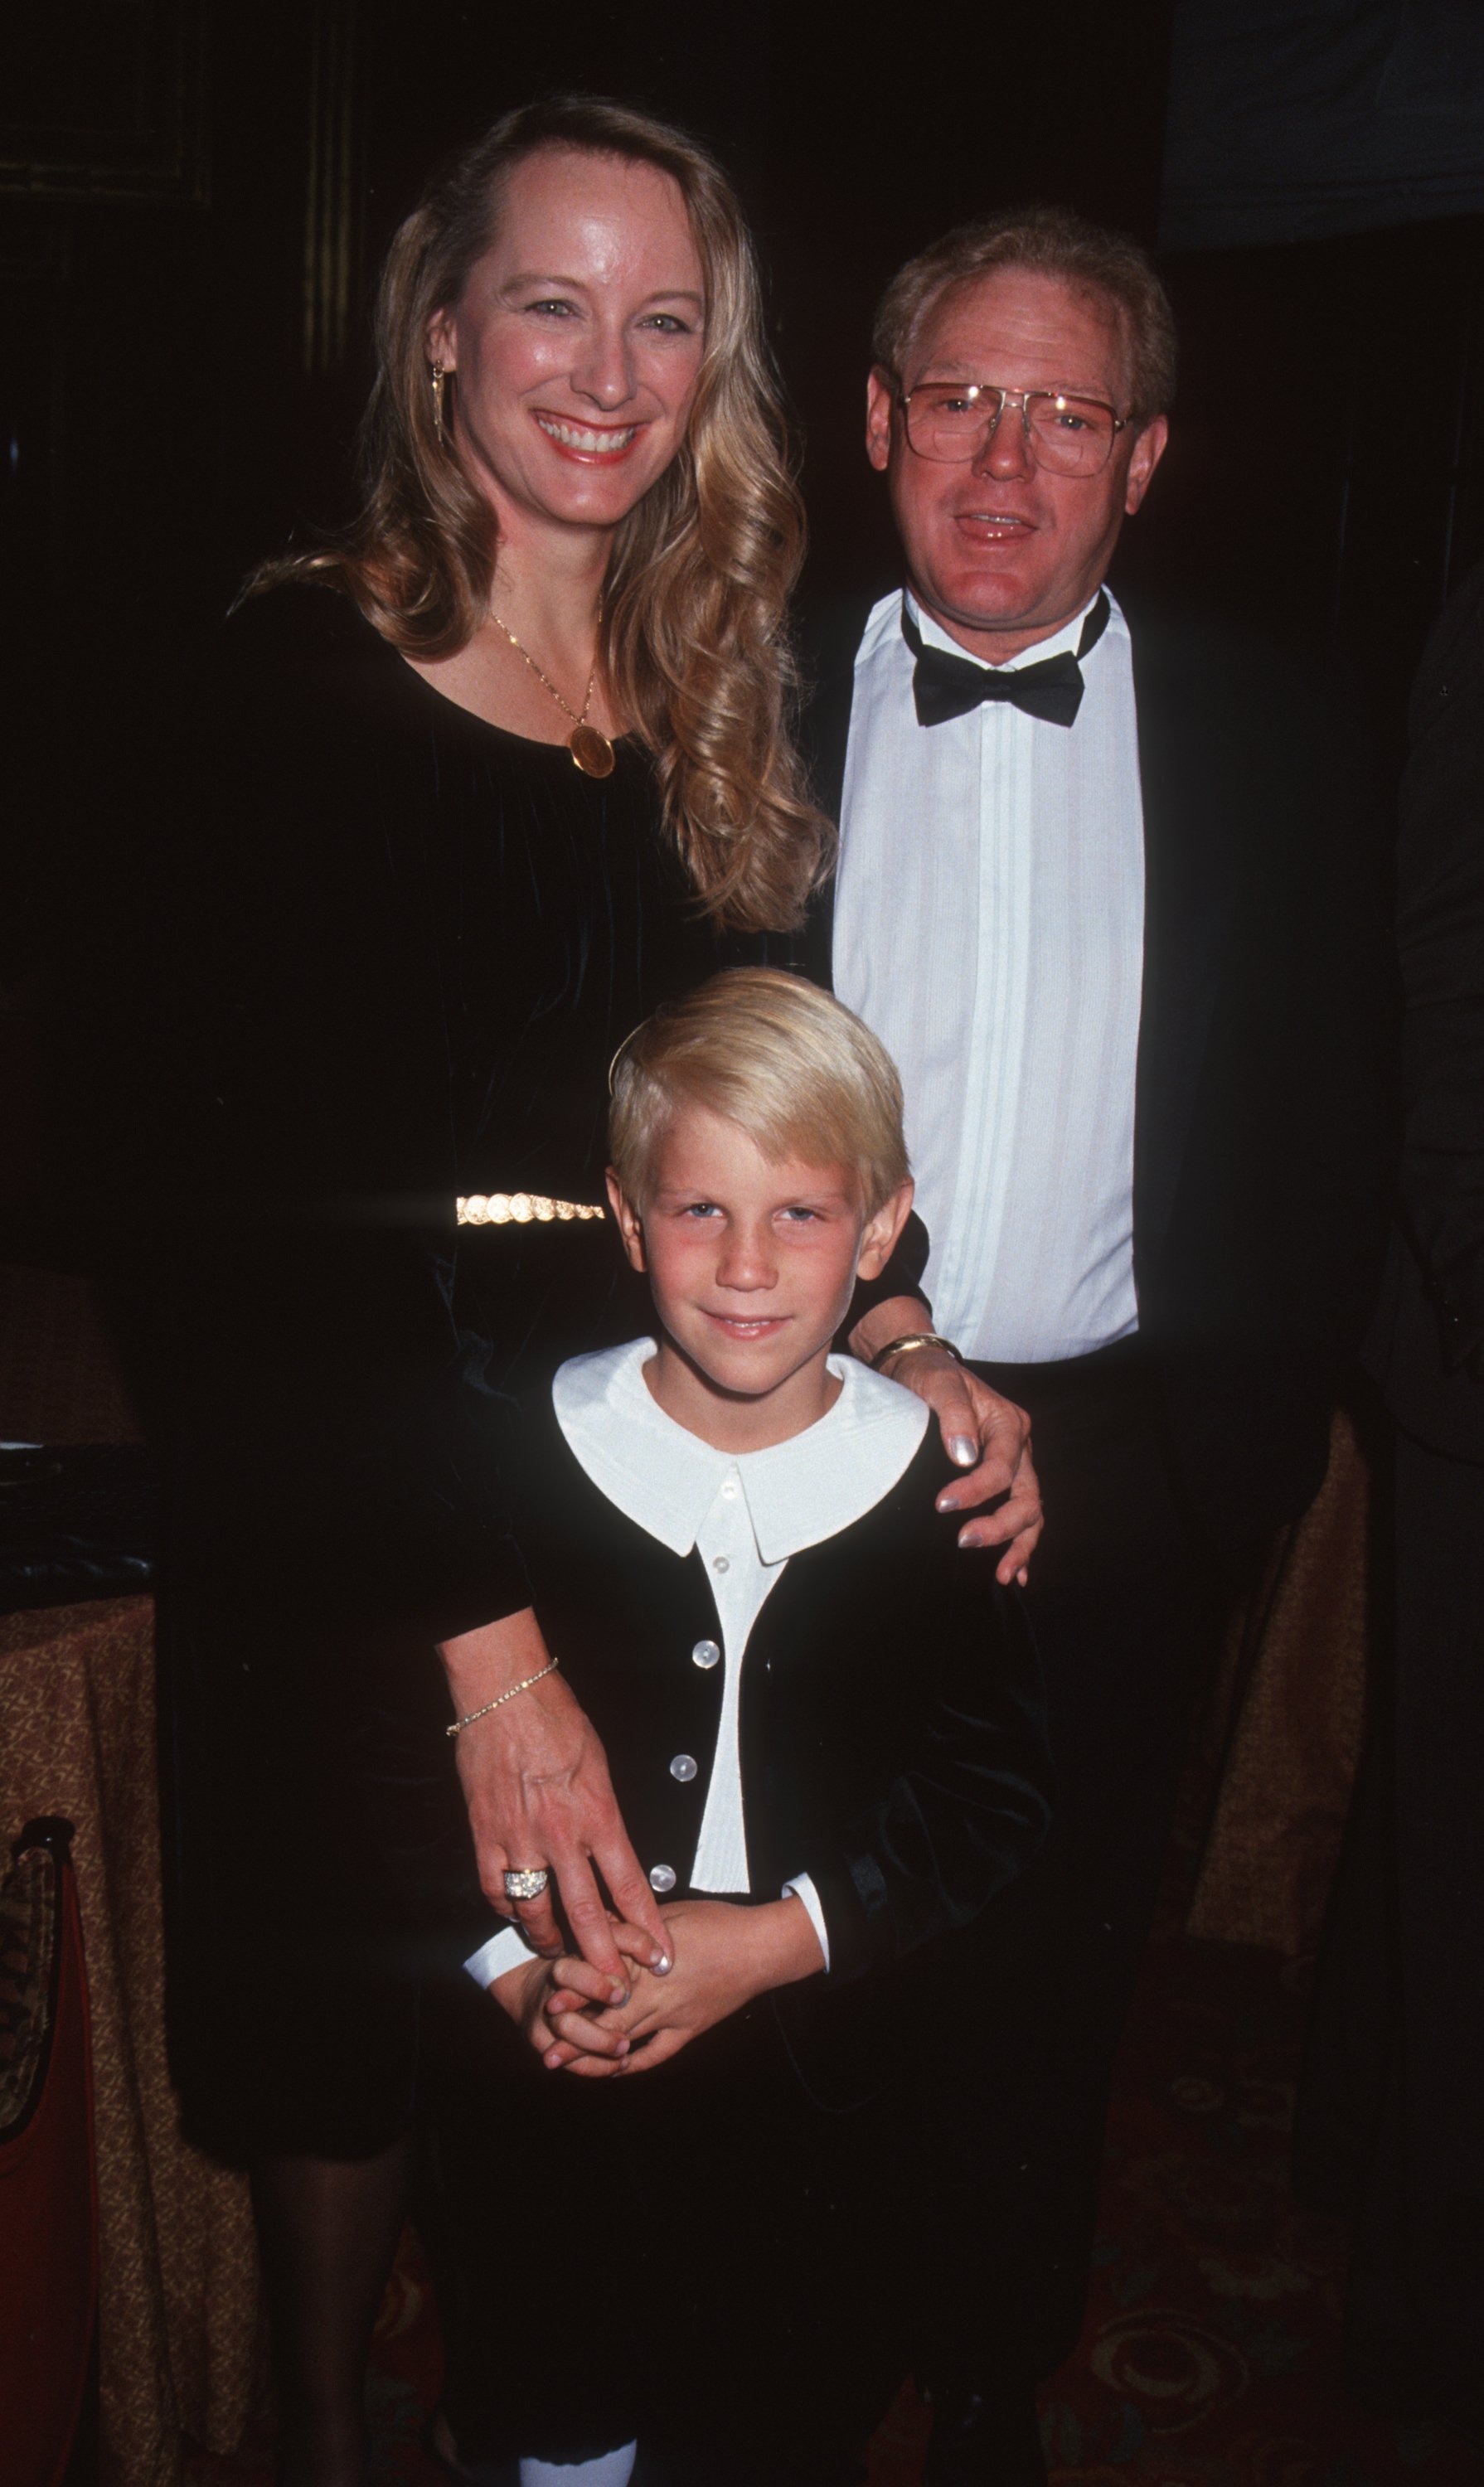 Actor James MacArthur, wife Helen Beth Duntz and son Jamie MacArthur attend Victoria's Magazine "A Star in Our Crown" Gala on May 18, 1992 at Essex House in New York City | Photo: Getty Image